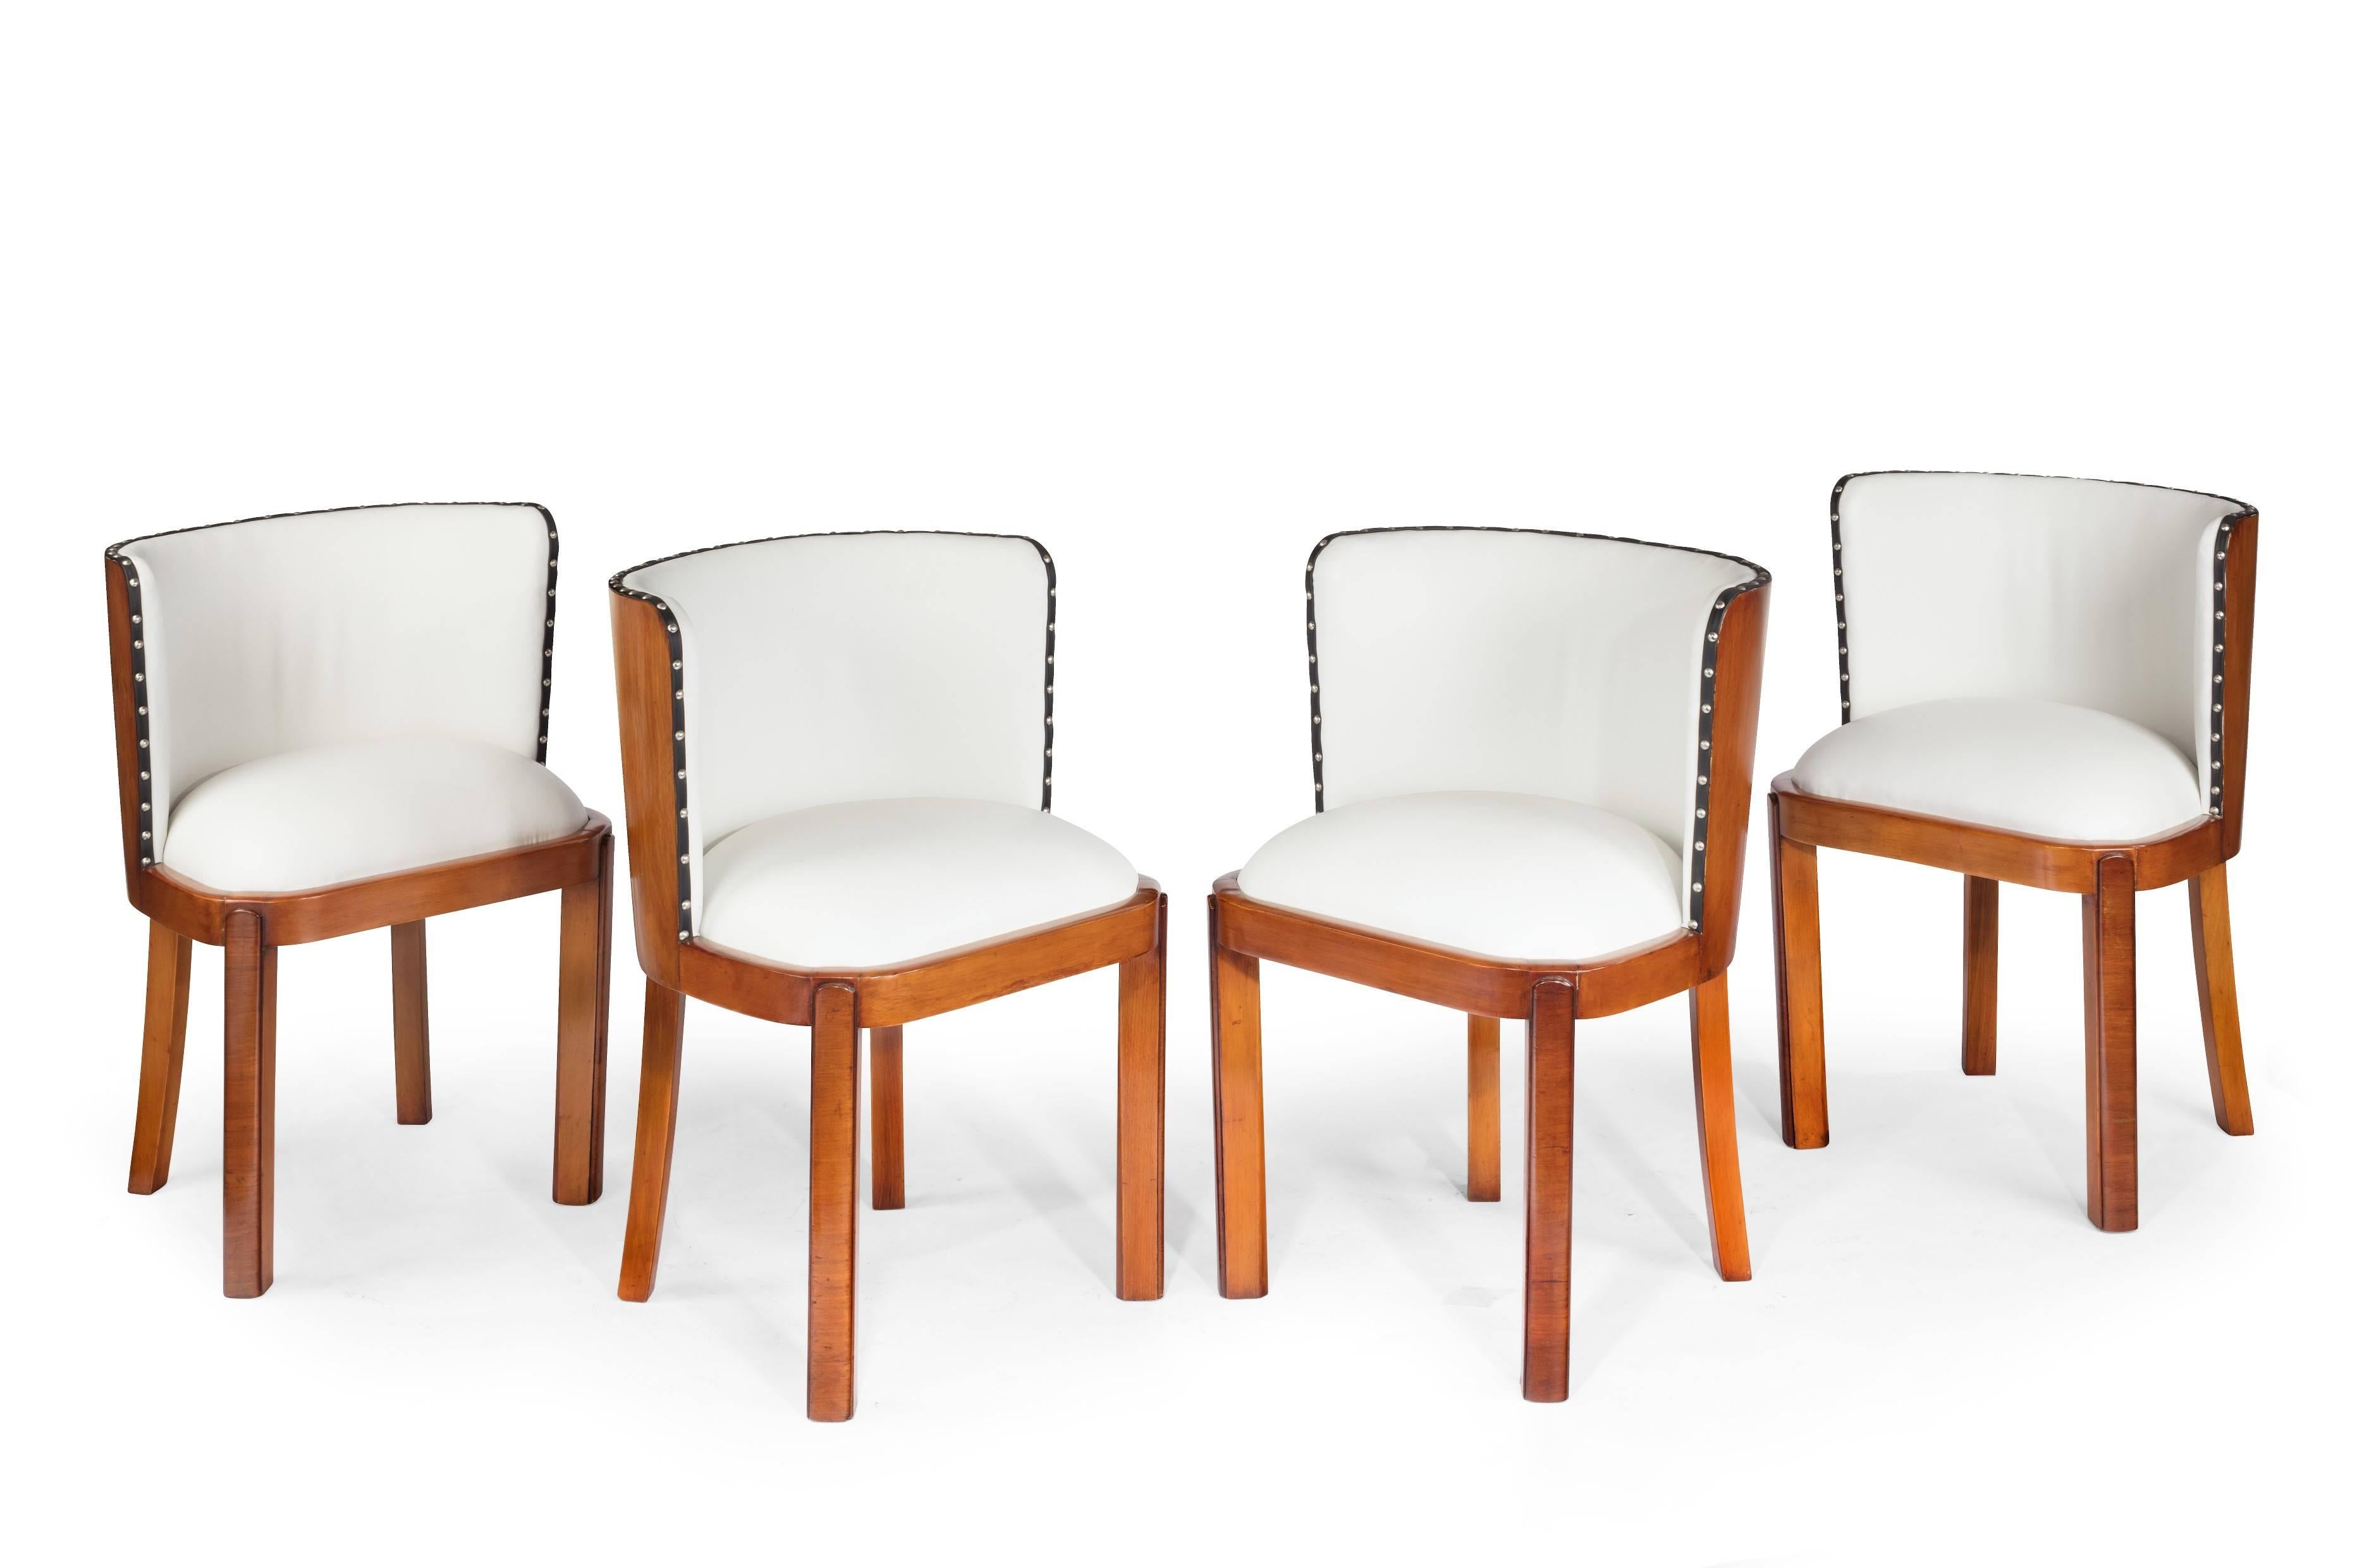 British Set of Four Walnut and Leather Art Deco Chairs